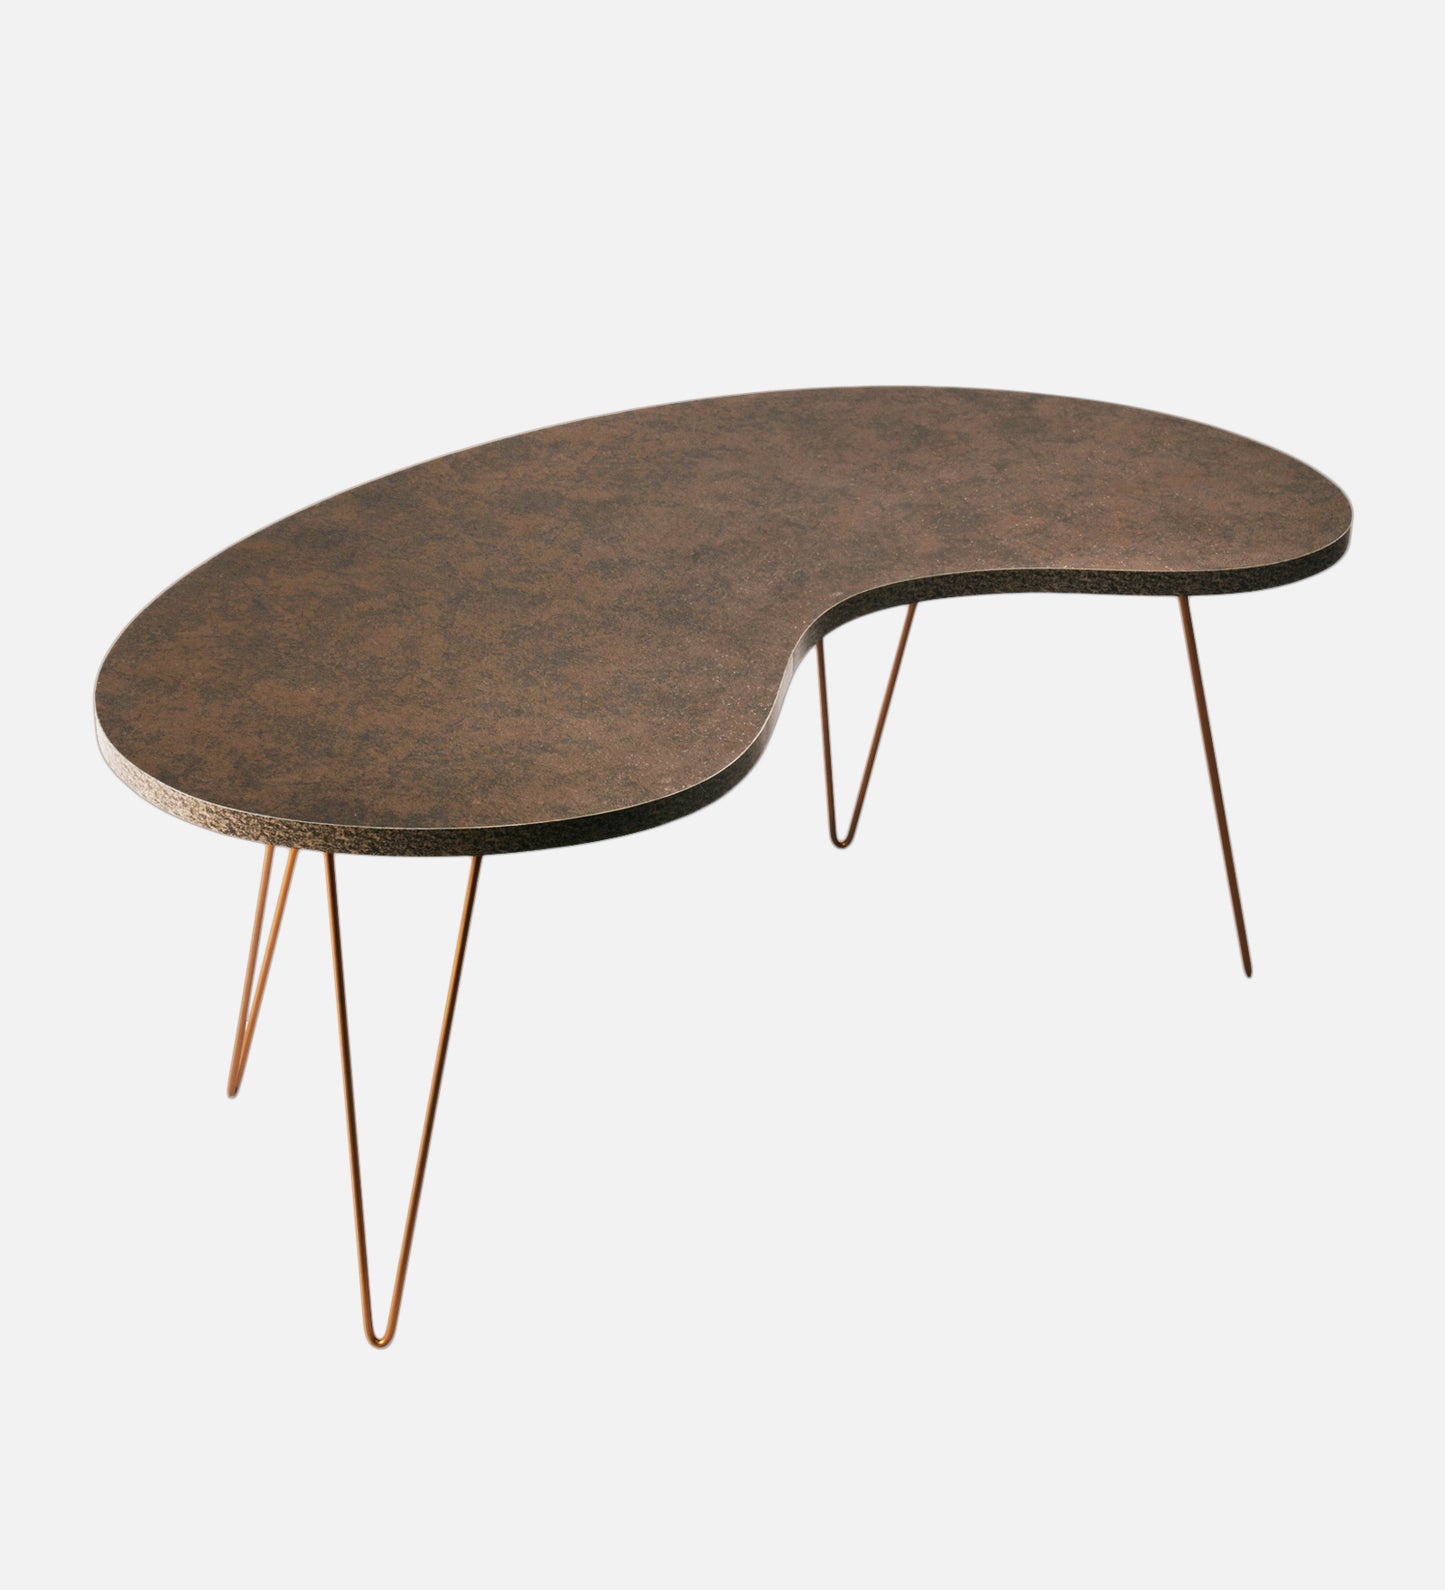 Twilight Bean Shape Coffee Tables, Wooden Tables, Coffee Tables, Center Tables, Living Room Decor by A Tiny Mistake